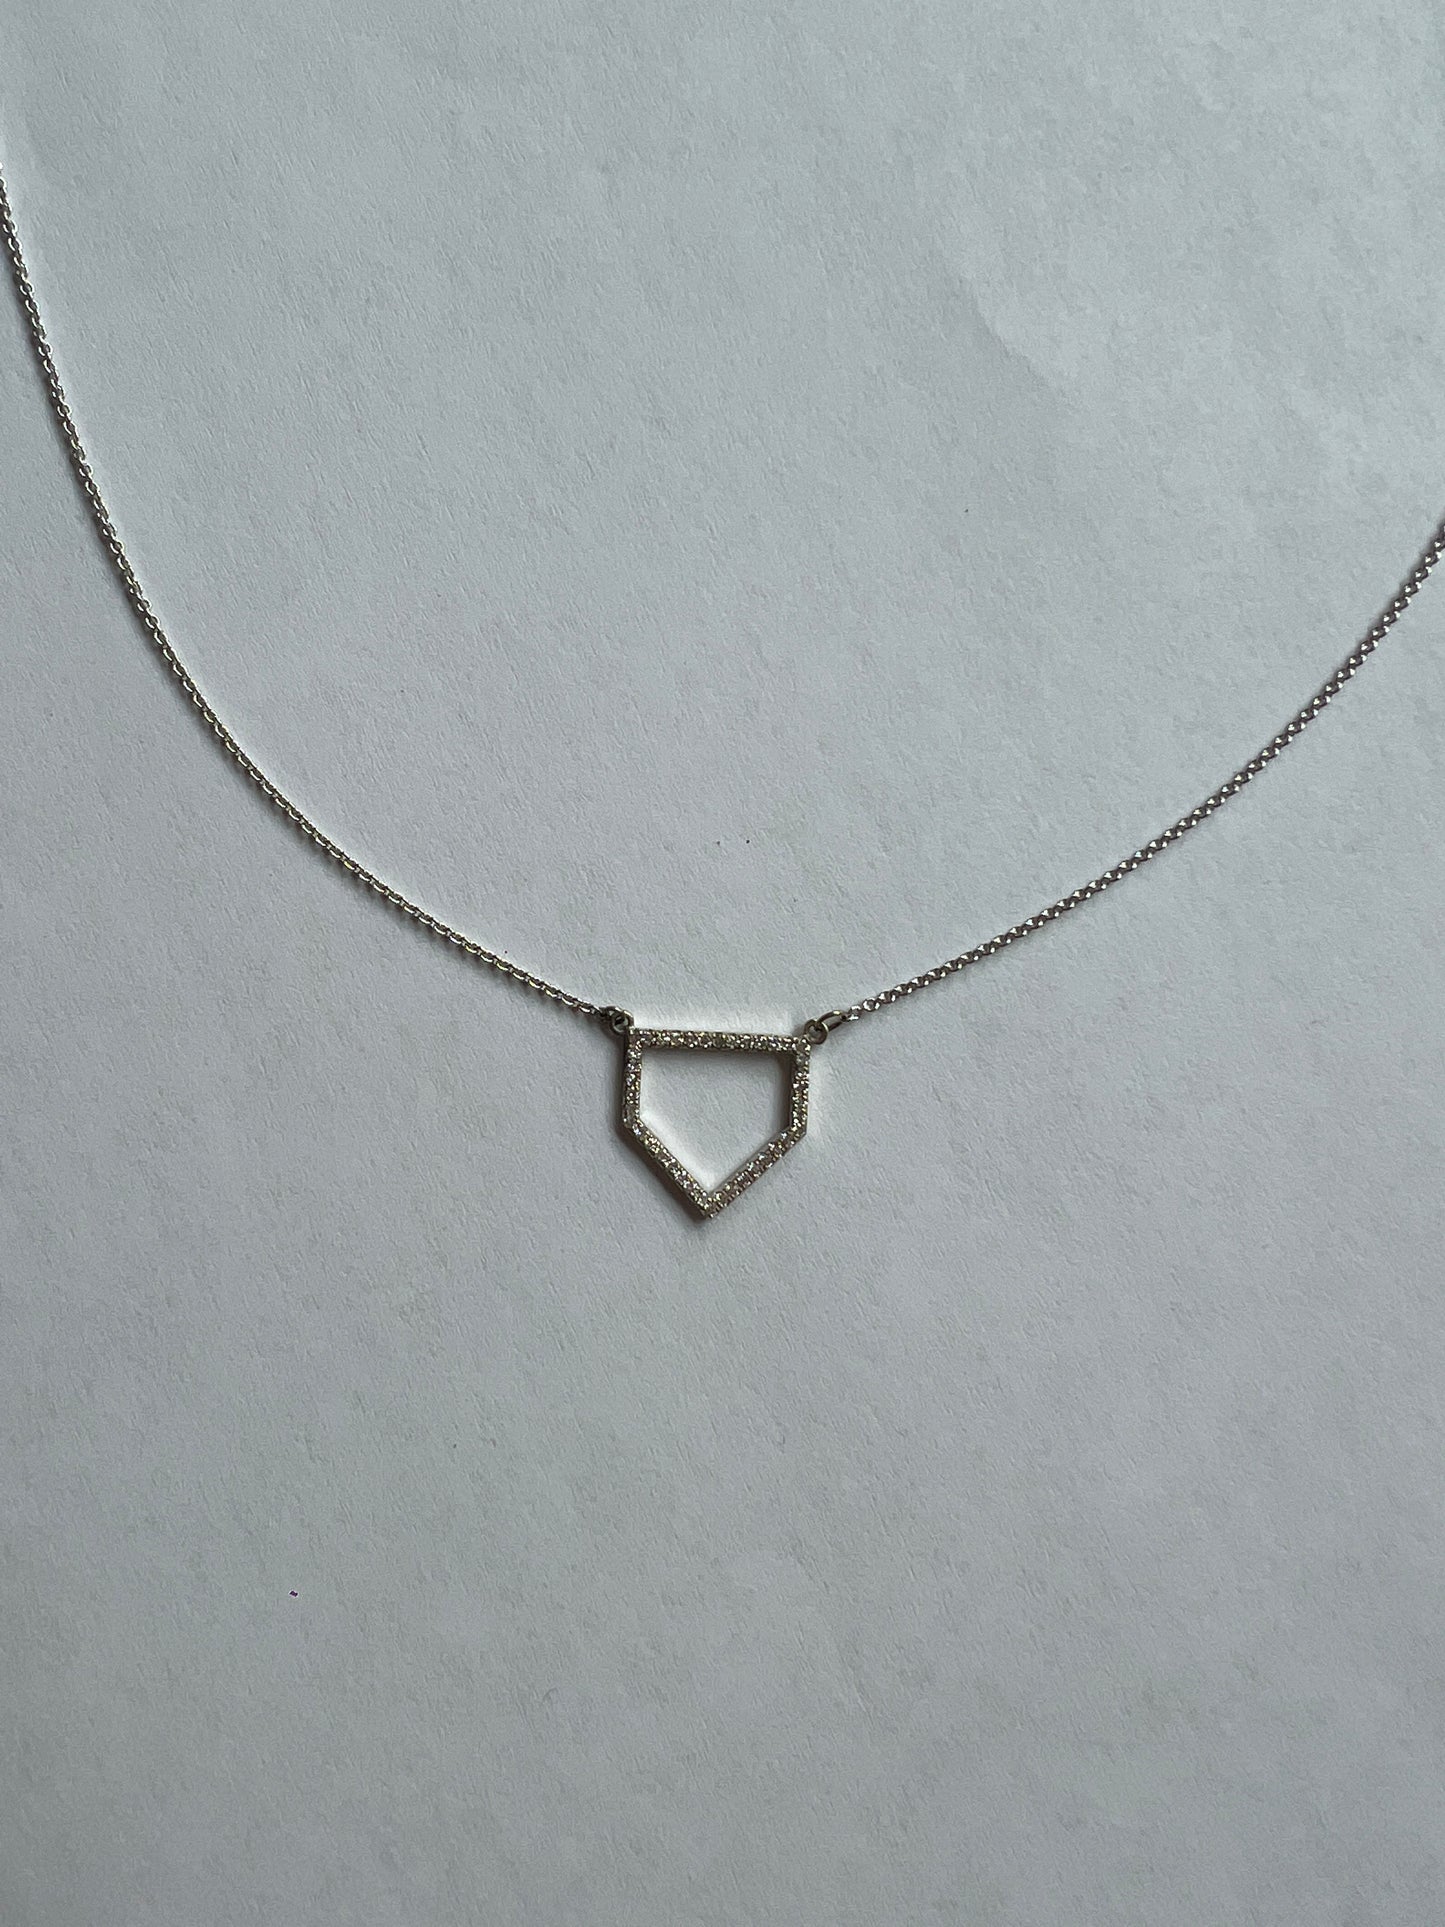 Home Plate Diamond White Gold Necklace